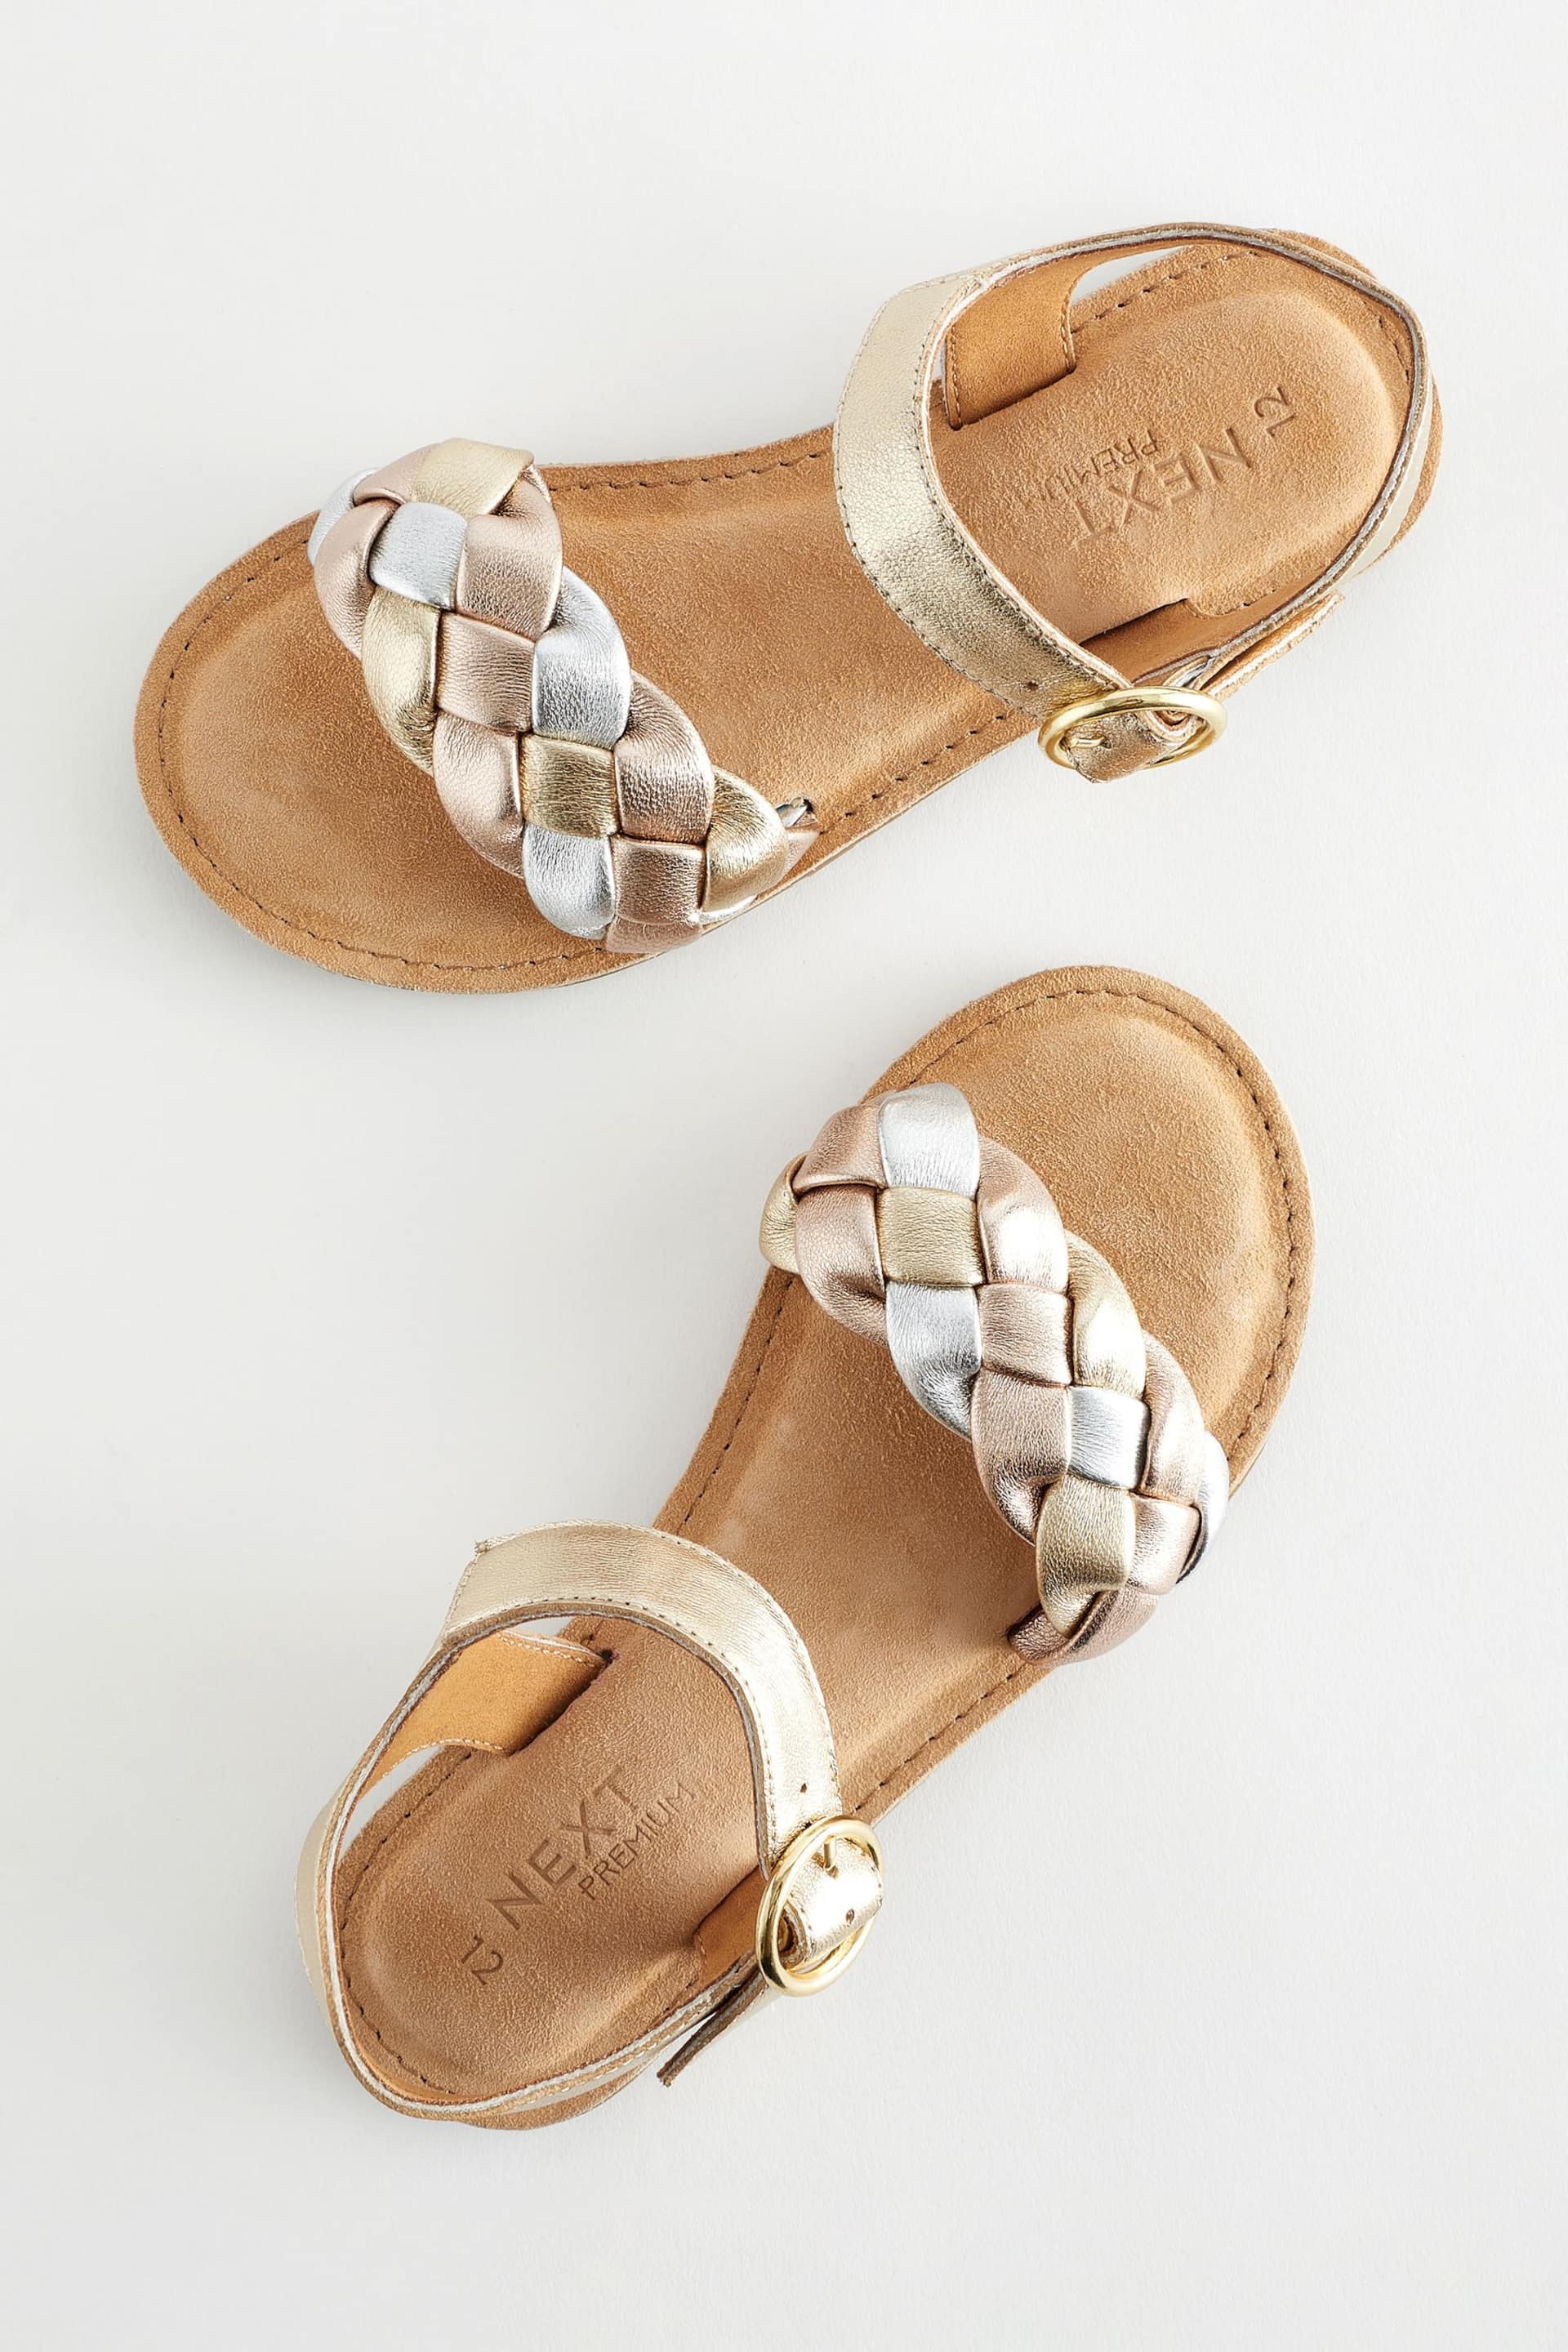 Gold Silver Metallic Leather Plaited Sandals - Image 4 of 6